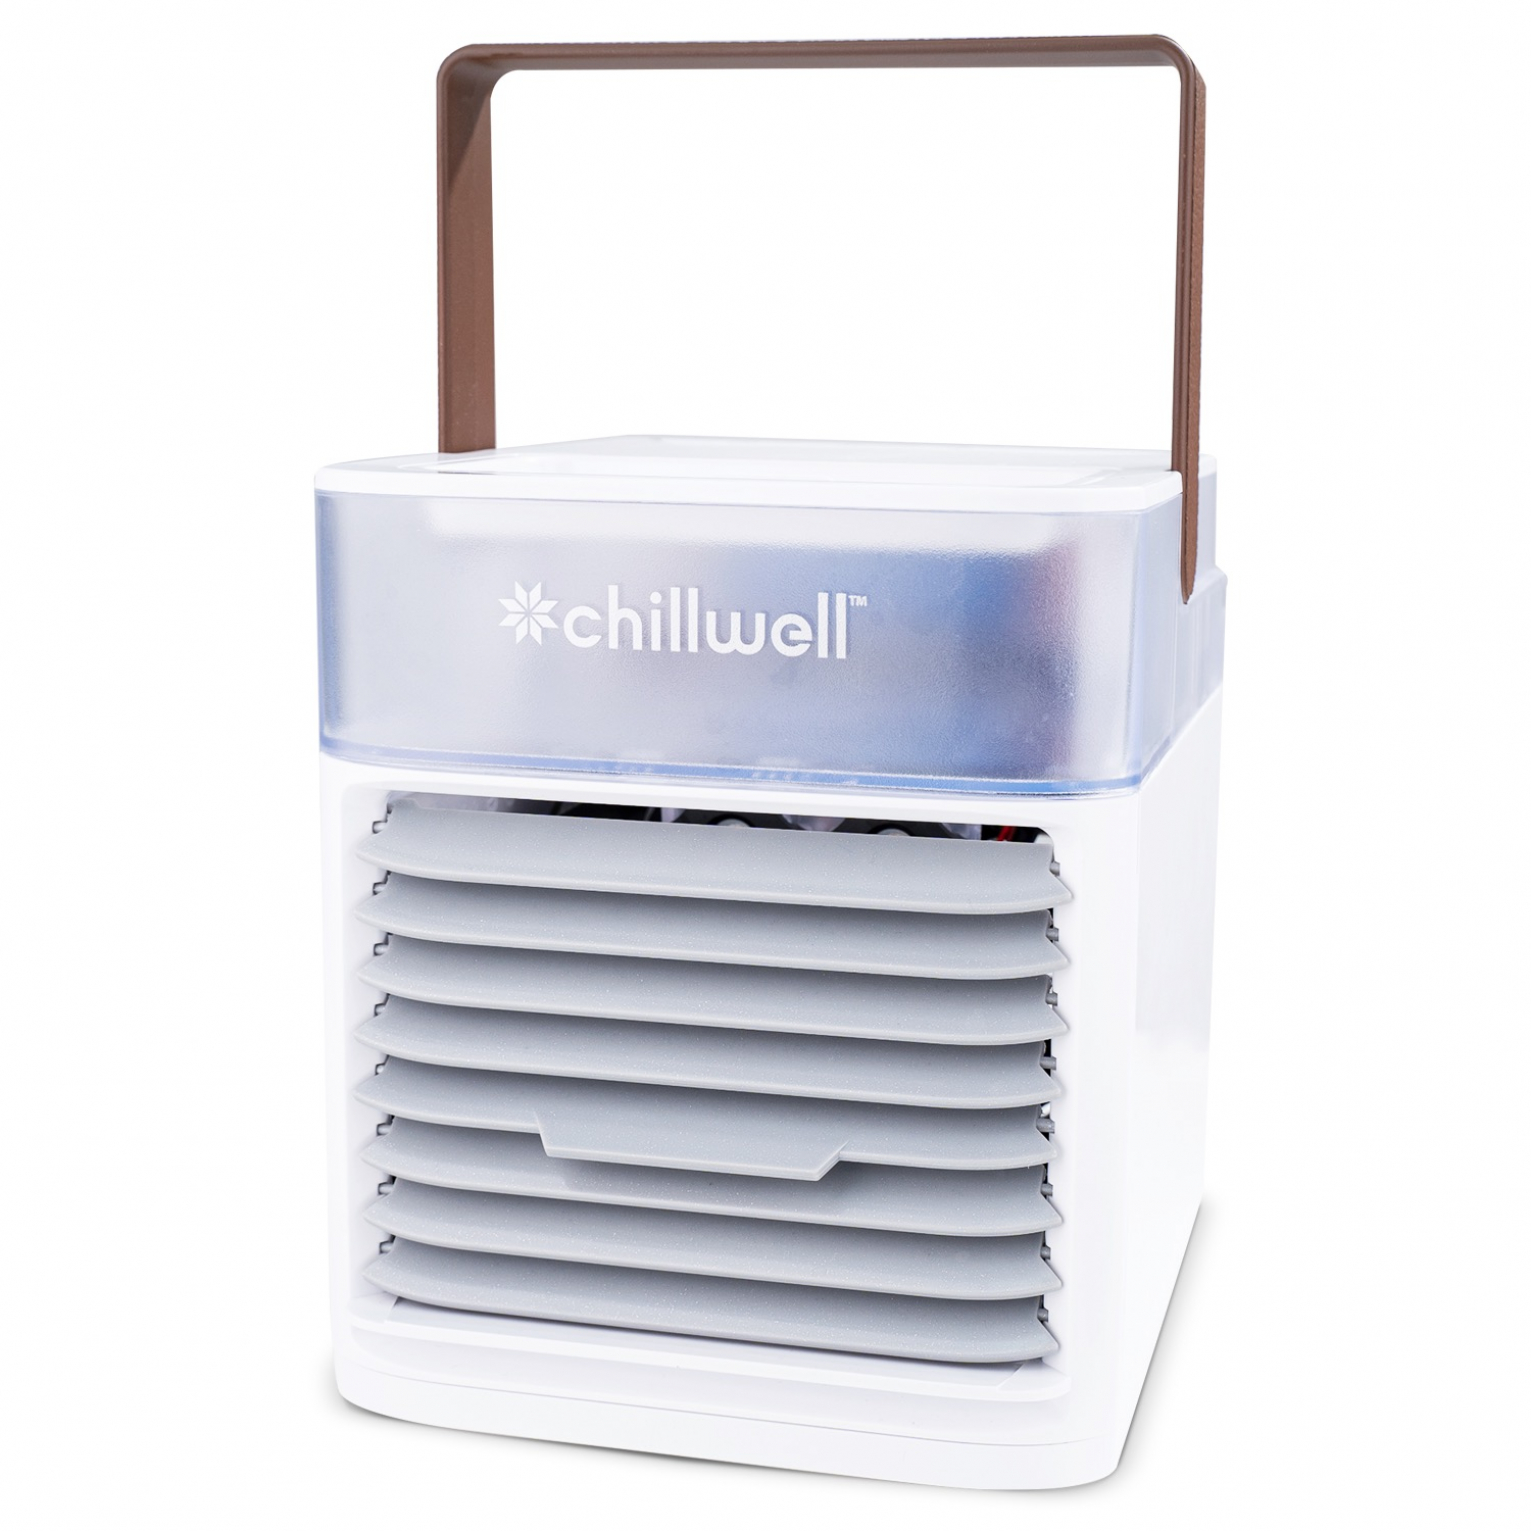 Chillwell AC Freedom Portable Personal Air Cooler